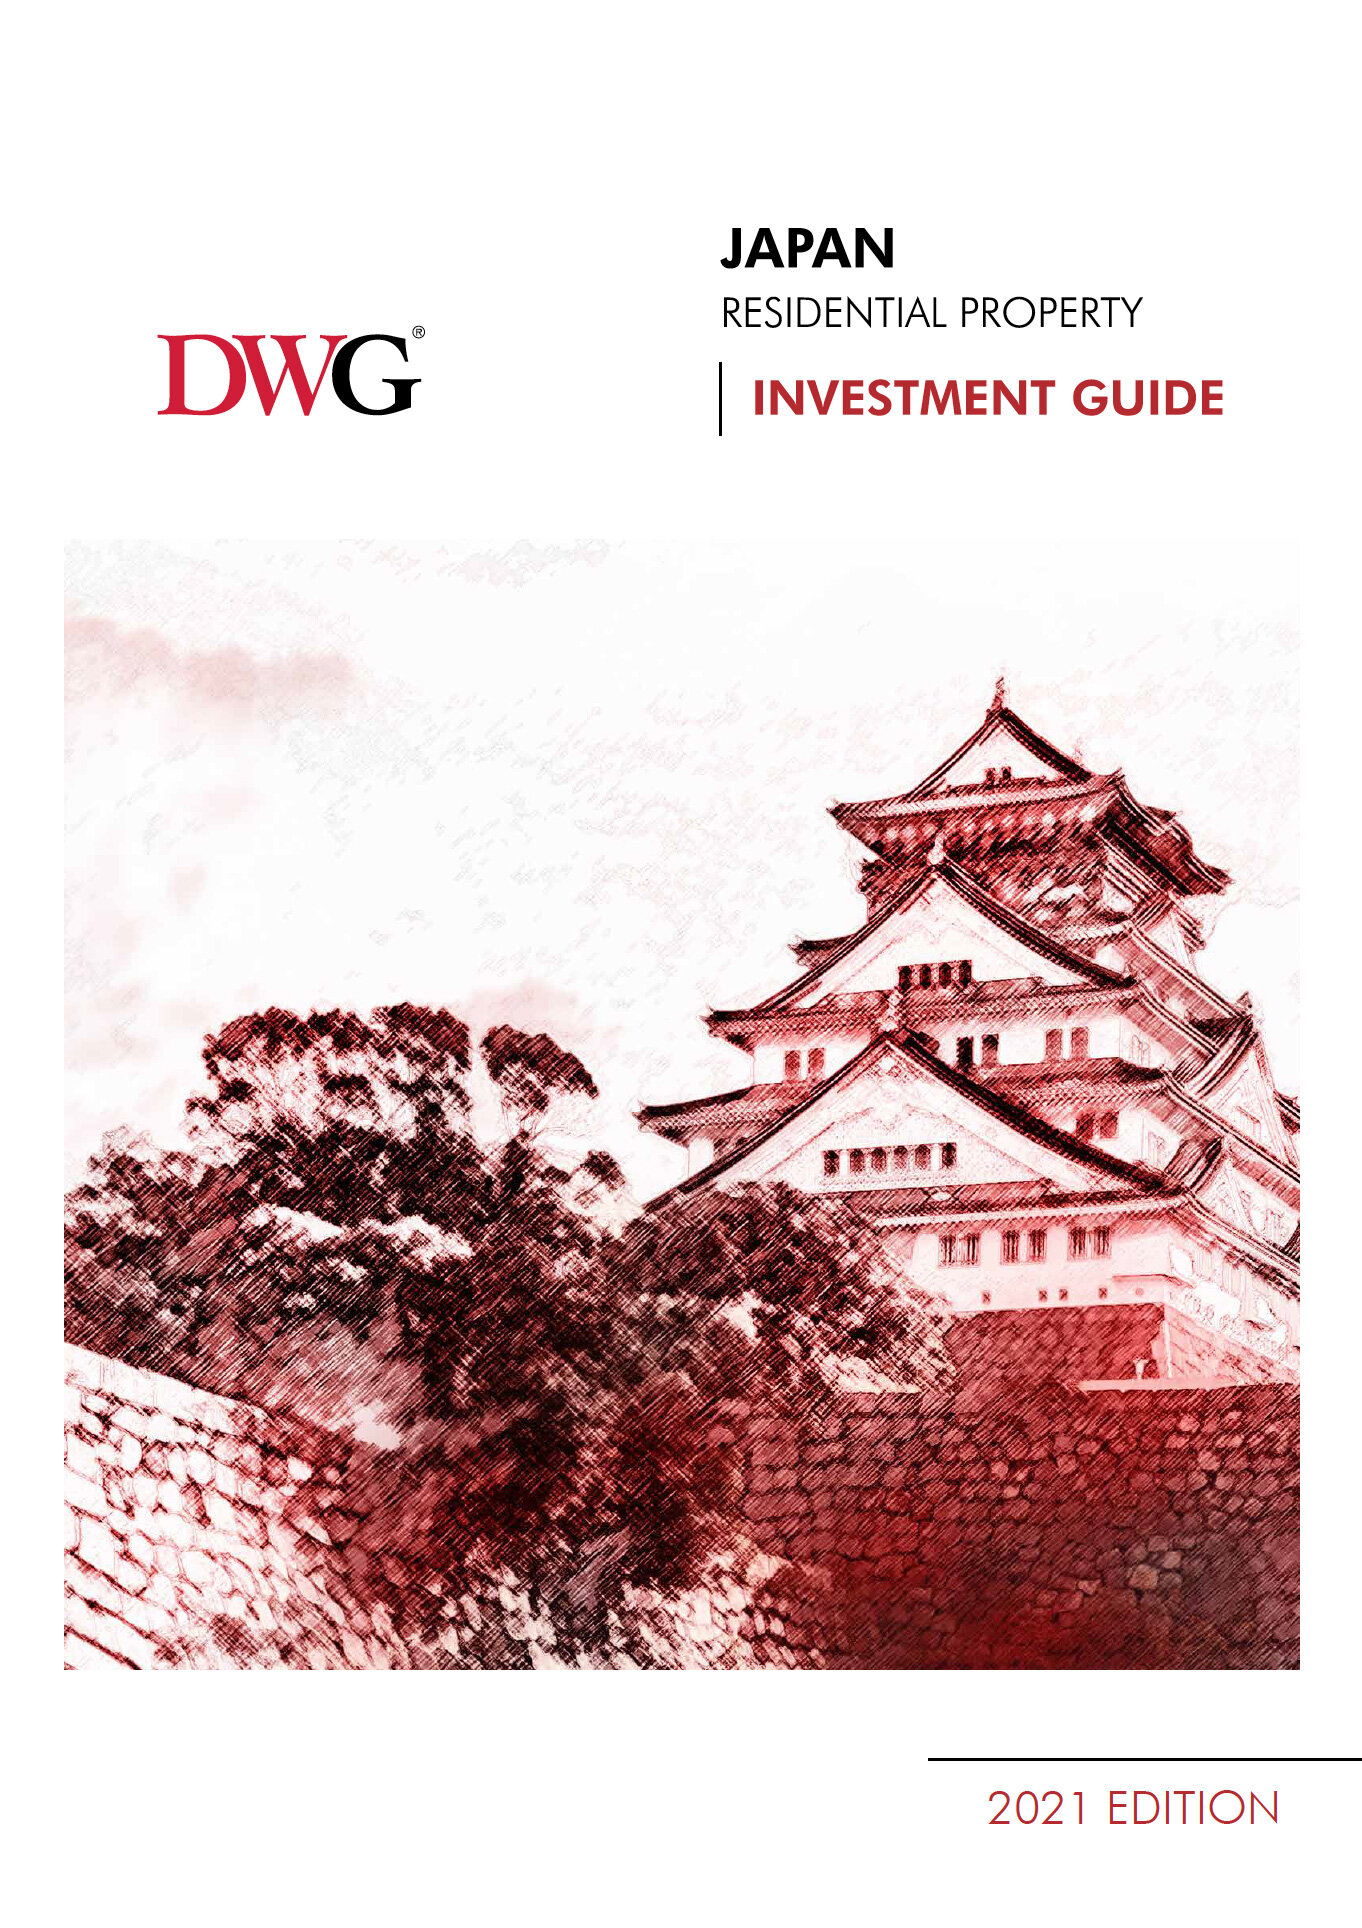 Japan Investment Guide 2021